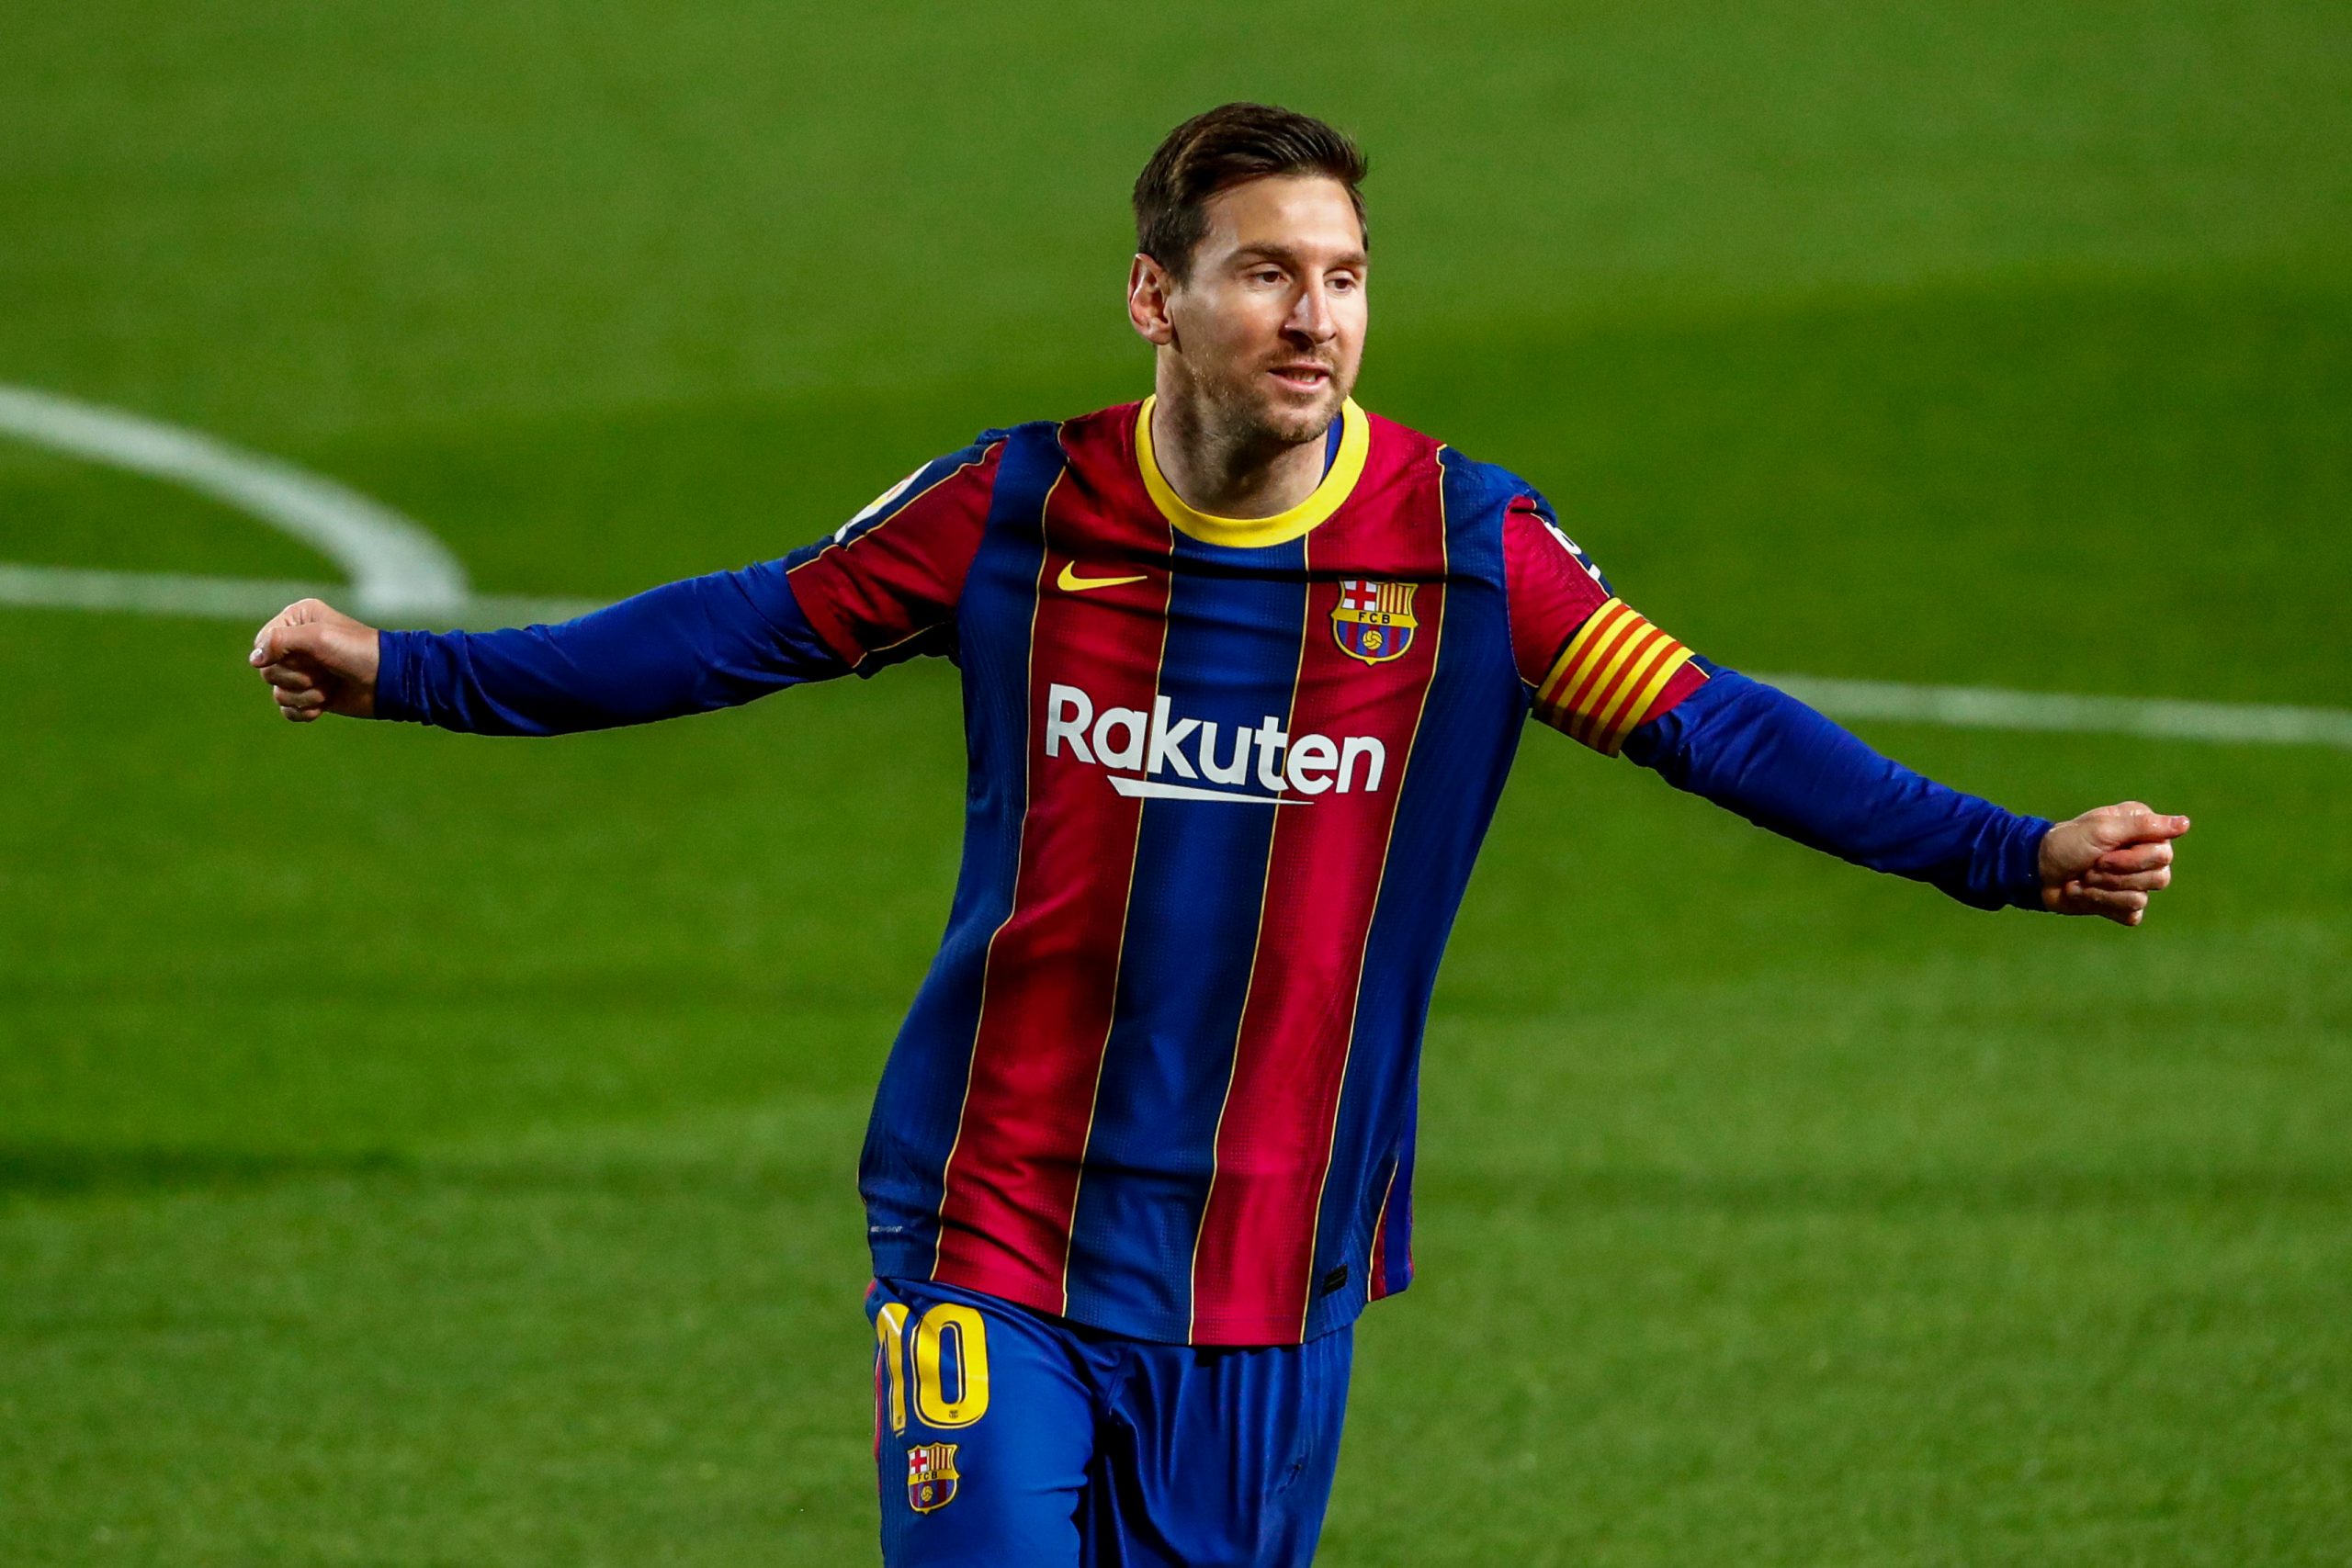 Lionel Messi agrees on deal to move to Paris Saint-Germain: Report